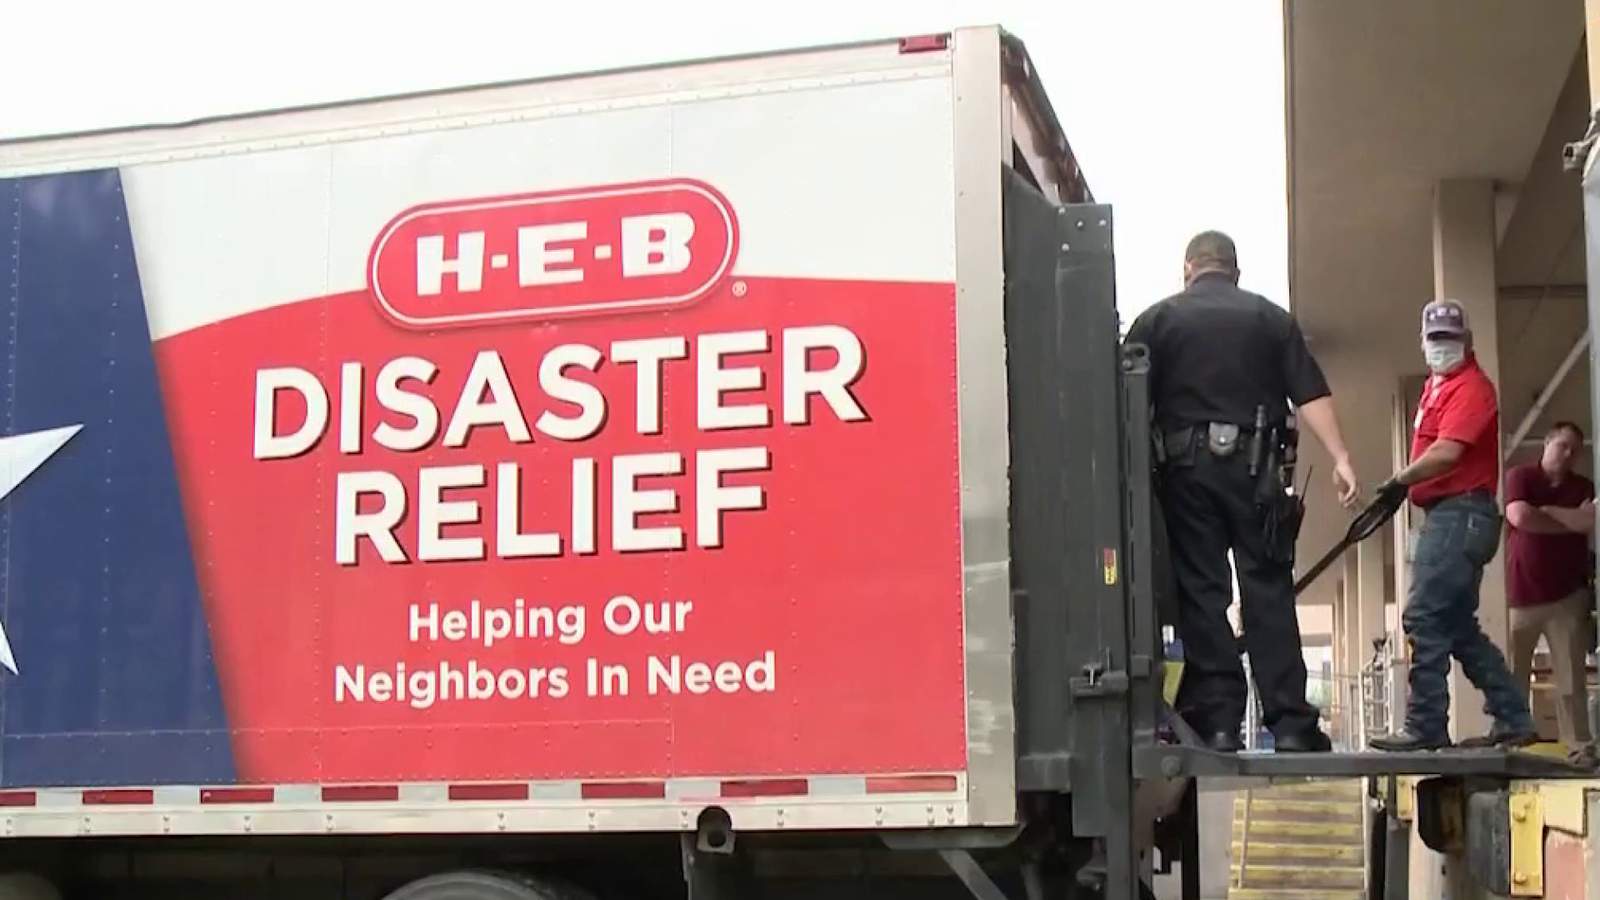 H-E-B says it will deliver 75,000 meals to health care workers at hospitals in Texas